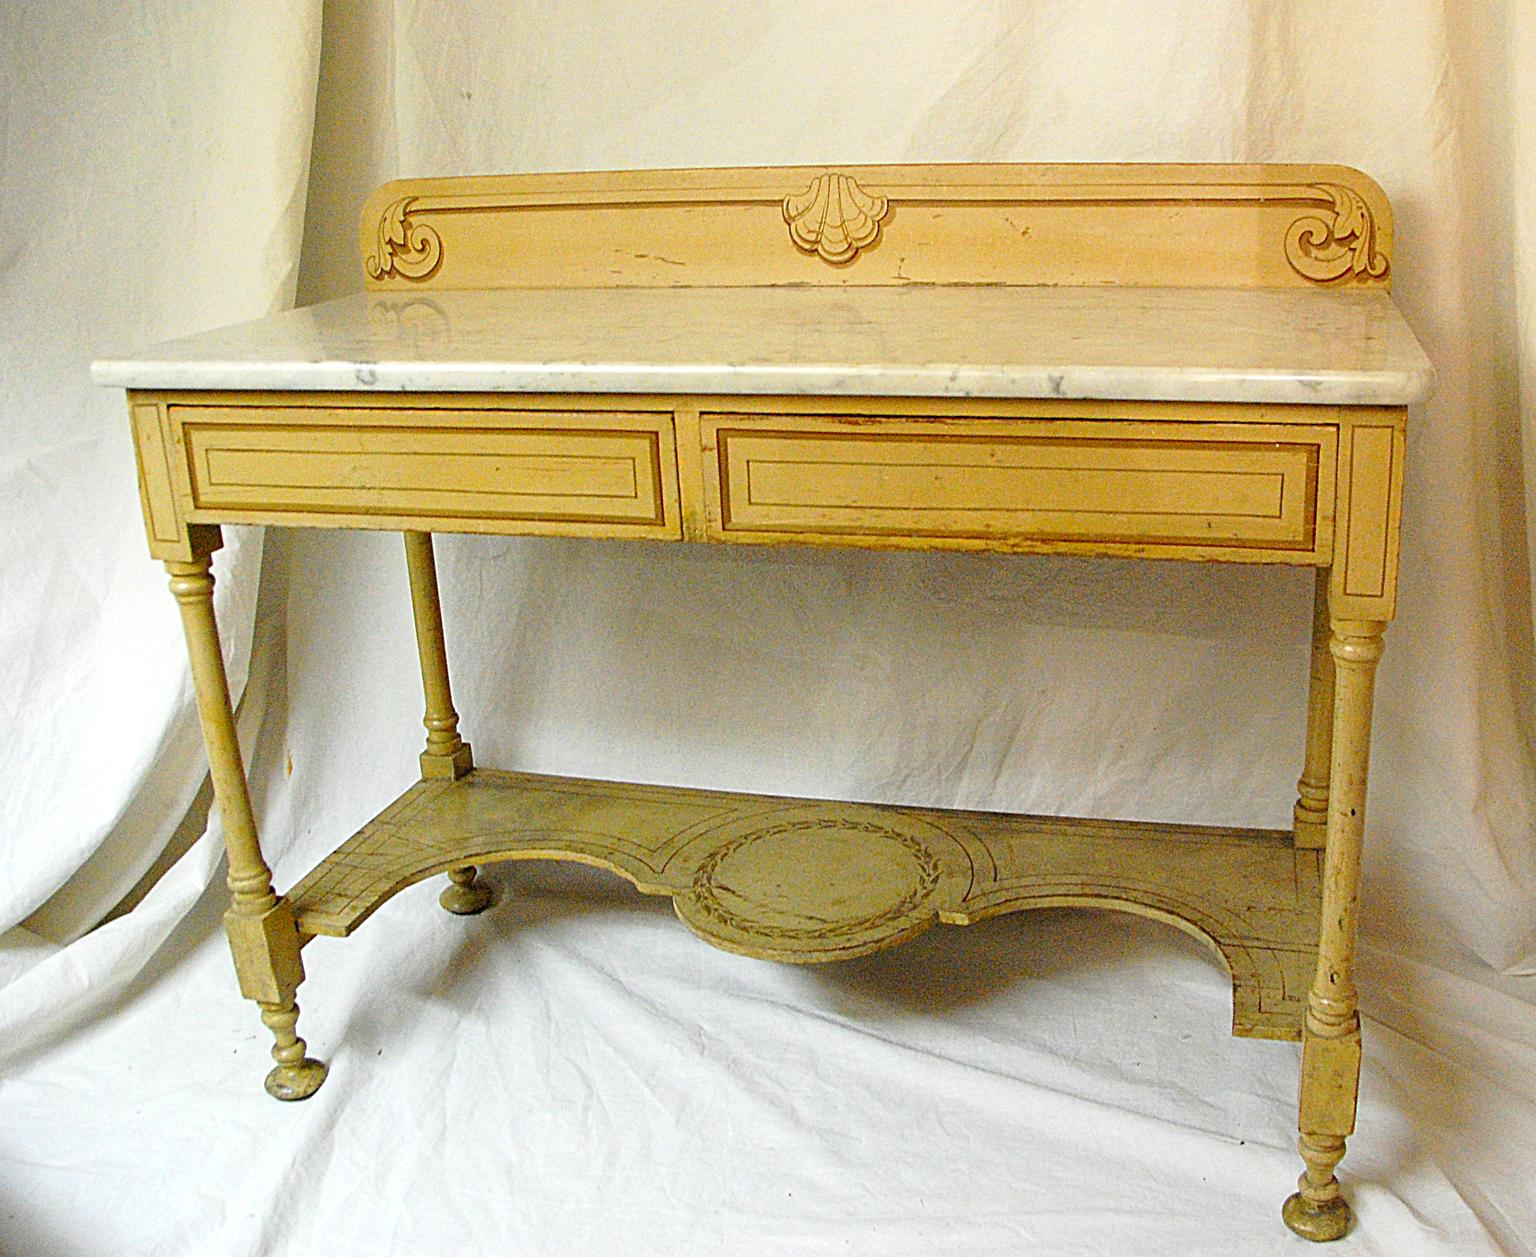 French Provincial mid-19th century painted two-drawer marble top server with shaped lower shelf. This handsome multipurpose table has its original decoration with shell, scroll and line detailing. The paint has some flaking and wear as one would